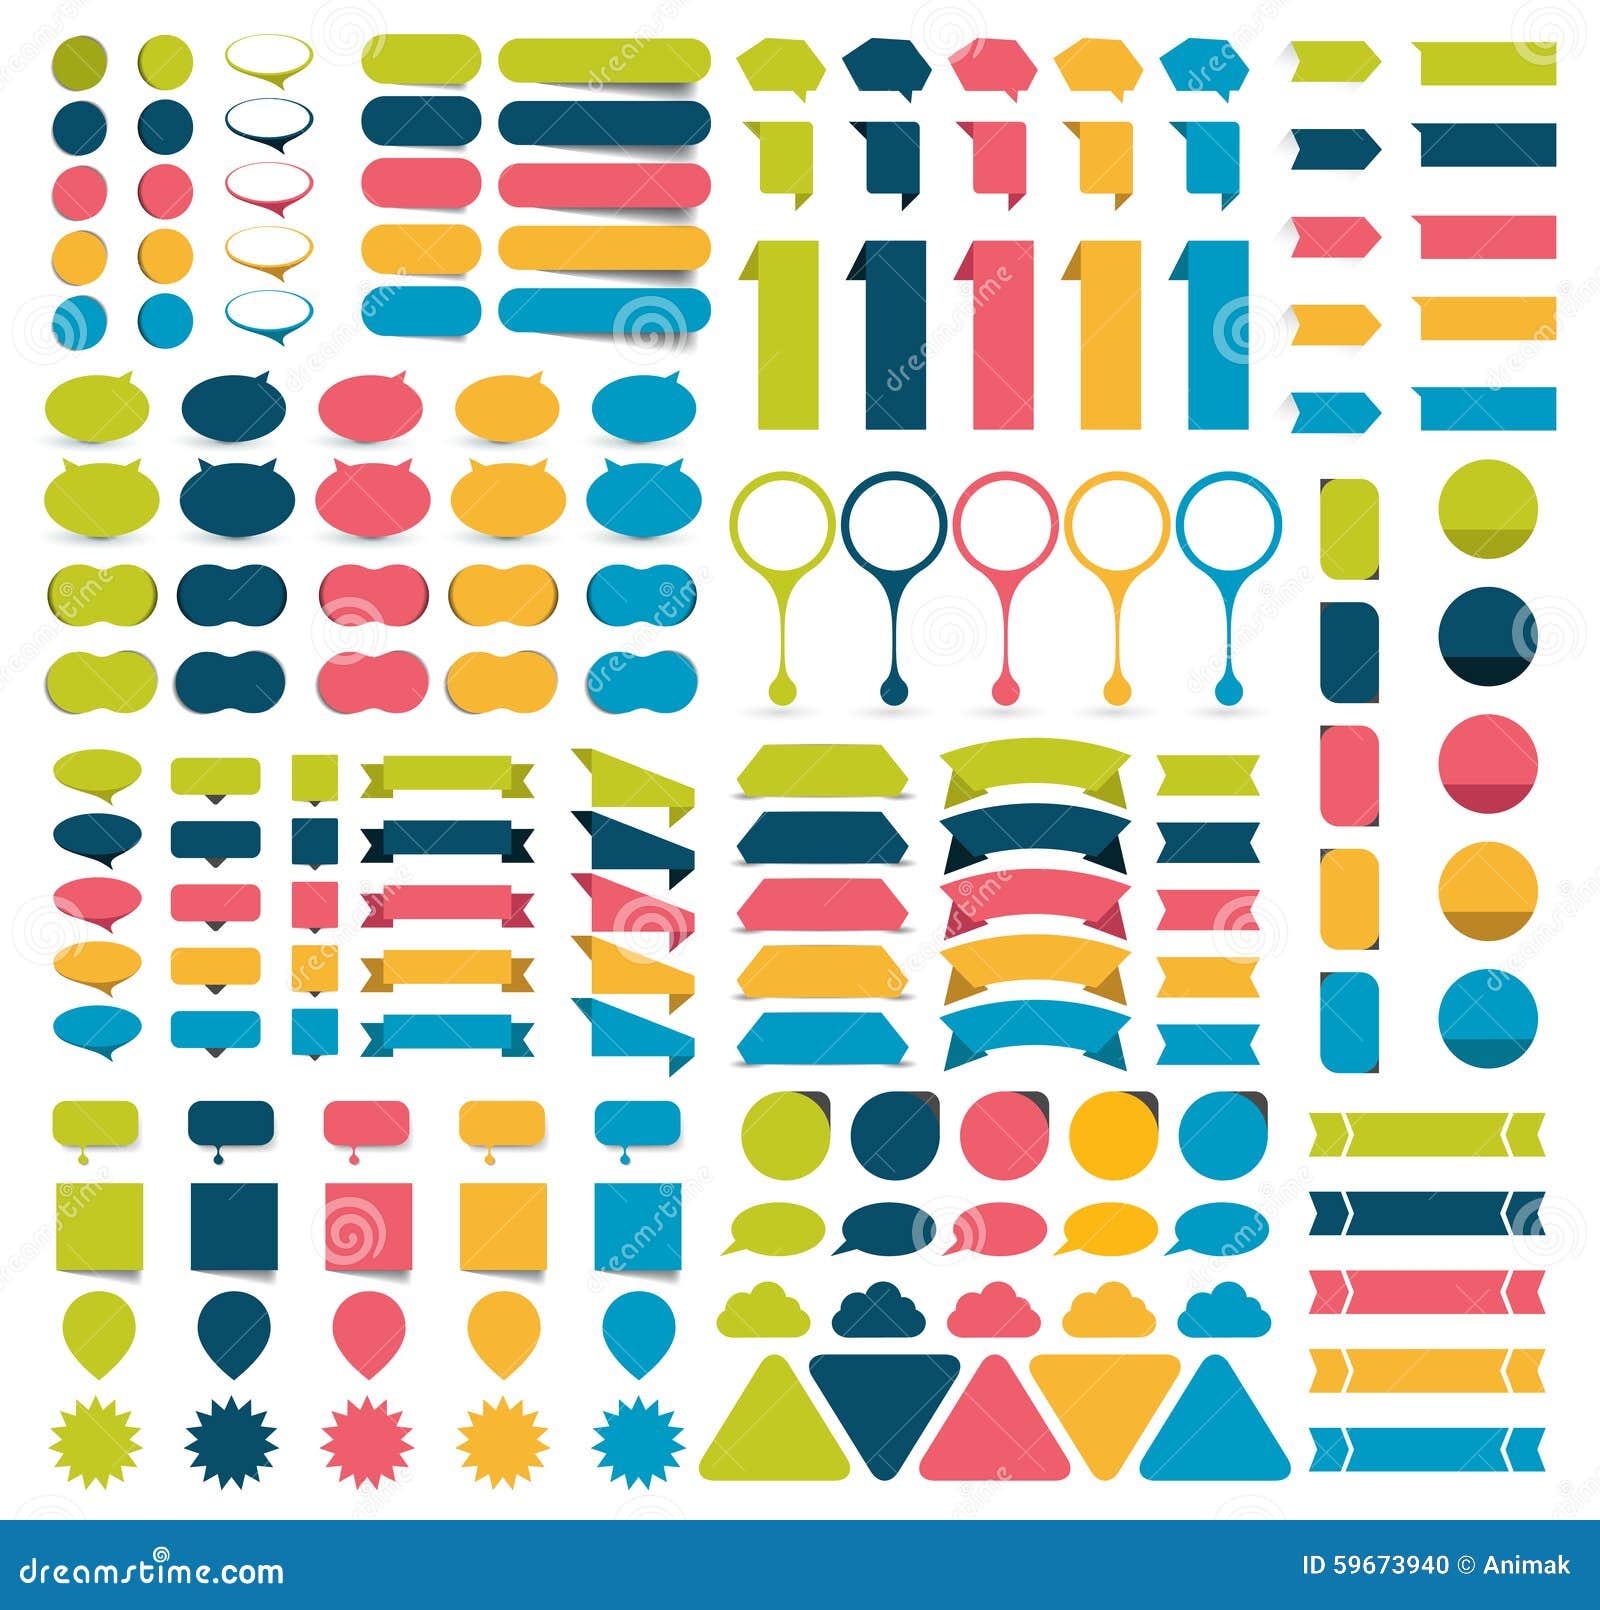 mega collections of infographics flat  s, buttons, stickers, note papers, pointers.